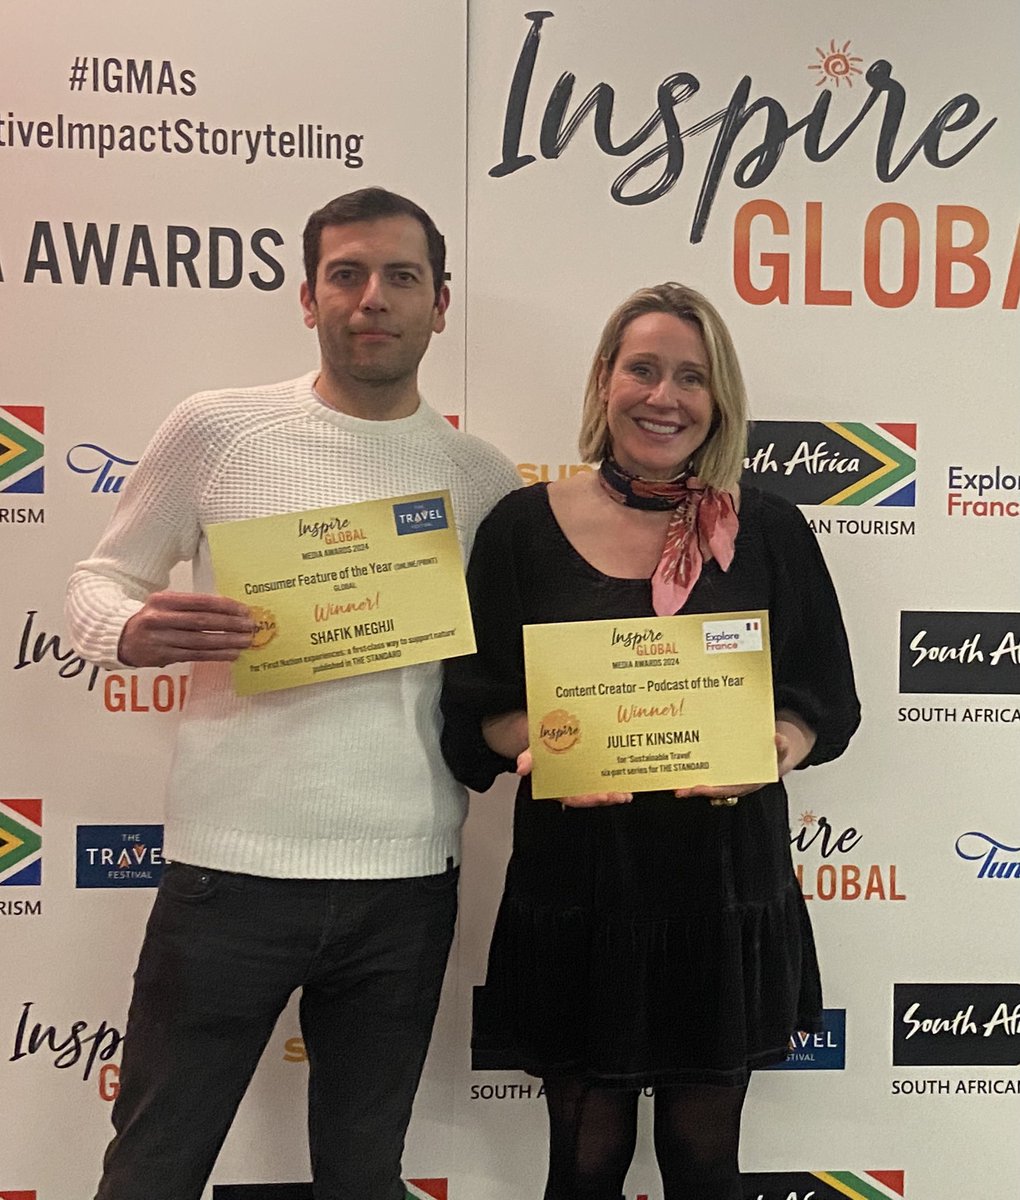 Chuffed to win an @Inspire_Global award last night for my @EveningStandard piece on Indigenous tourism. Thanks to the wonderful @JulietKinsman for the commission and for winning her own award 🙌🏽 #IGMAs #positiveimpacttorytelling